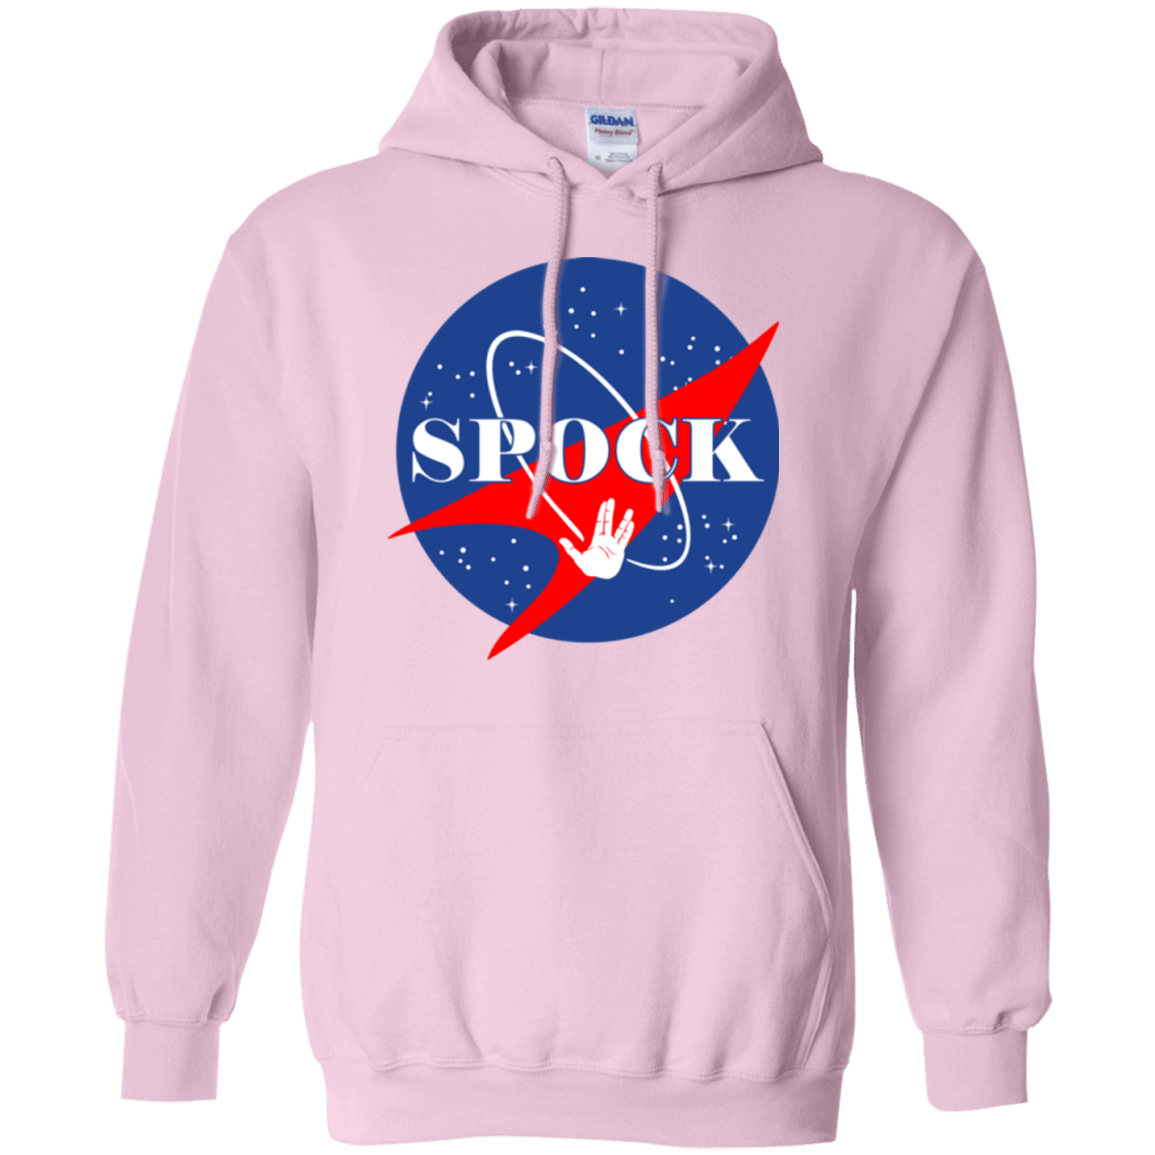 Sweatshirts Light Pink / Small Star captain Pullover Hoodie